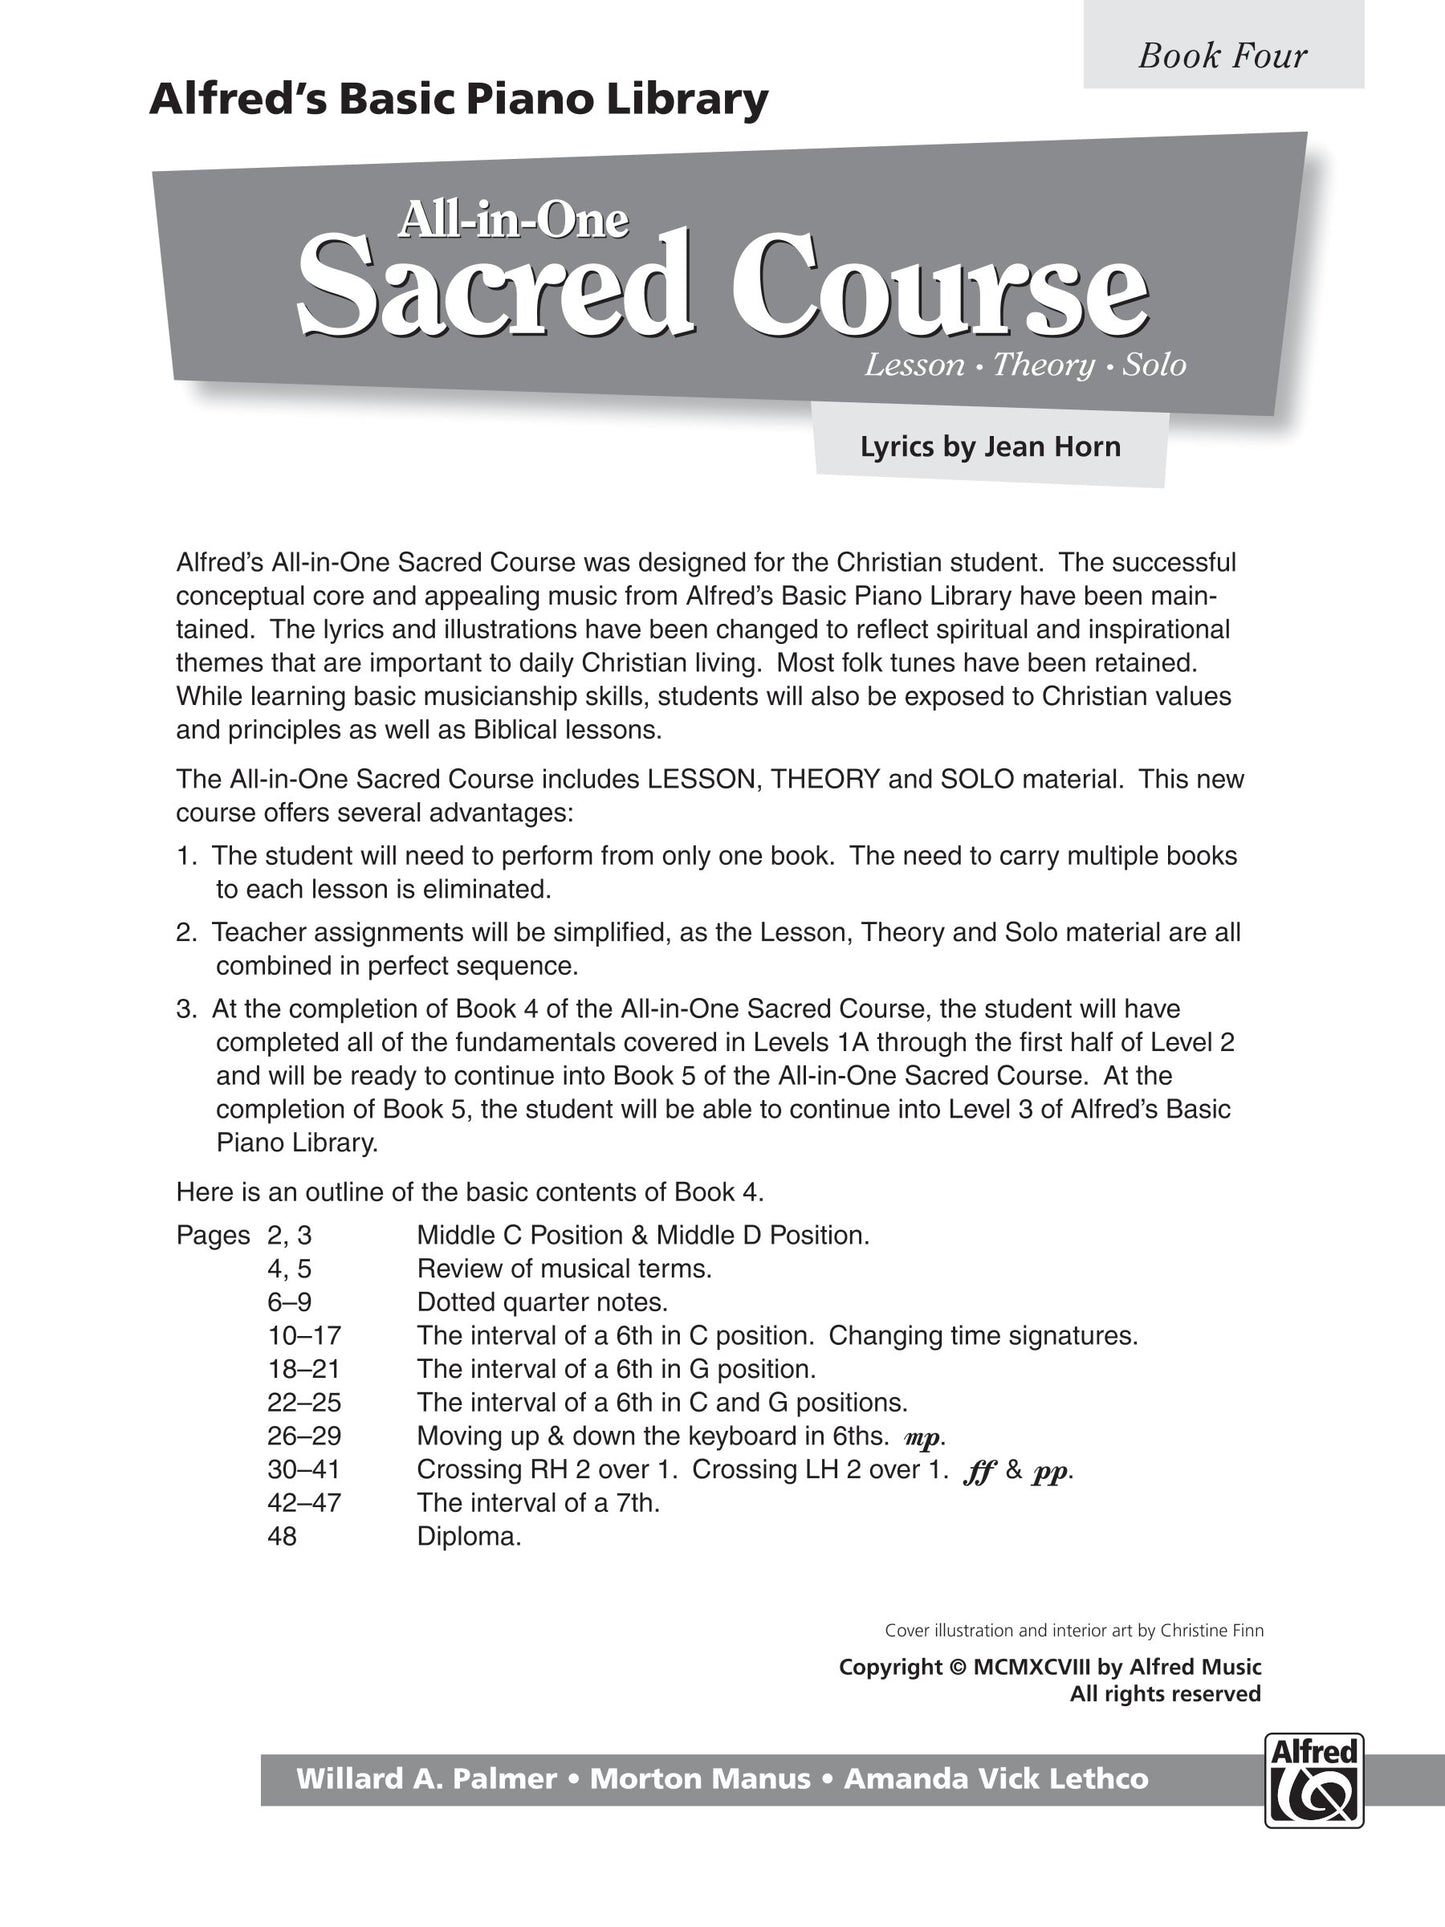 Alfred's Basic Piano Library - All-in-One Sacred Course Book 4